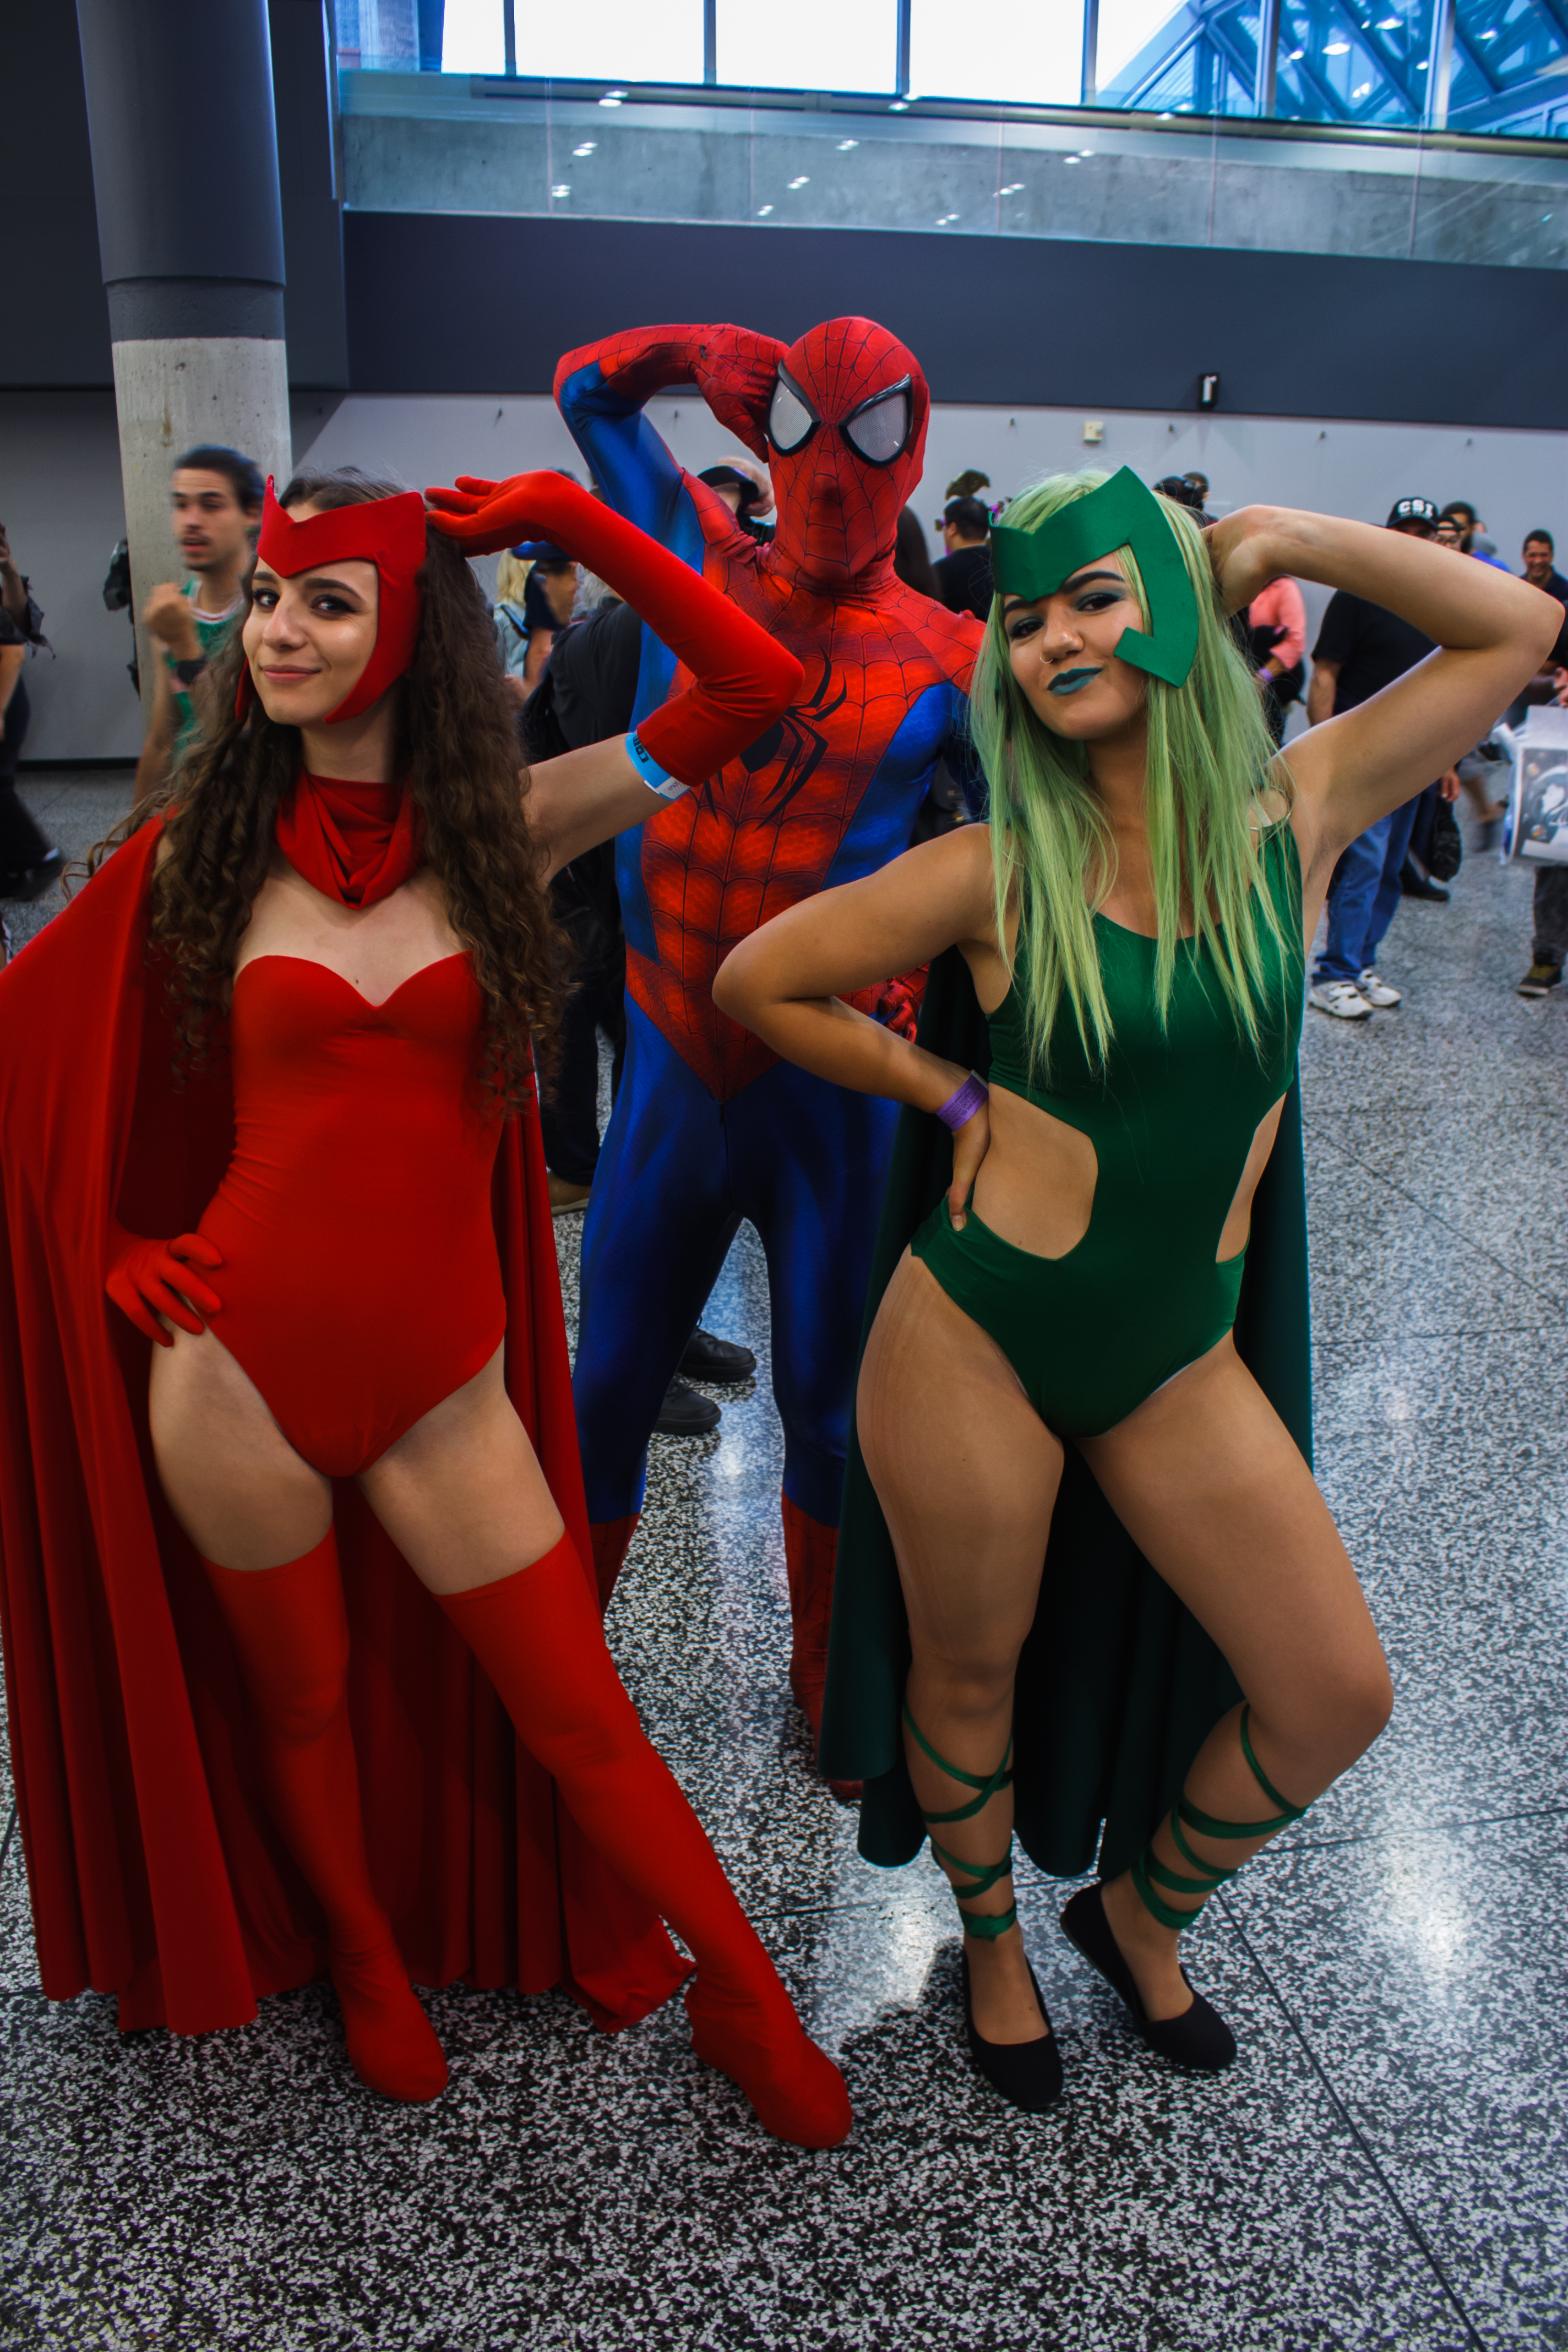 File:Montreal Comiccon 2016 - Scarlet Witch, Spider-Man and Polaris  (28181381121).jpg - Wikimedia Commons